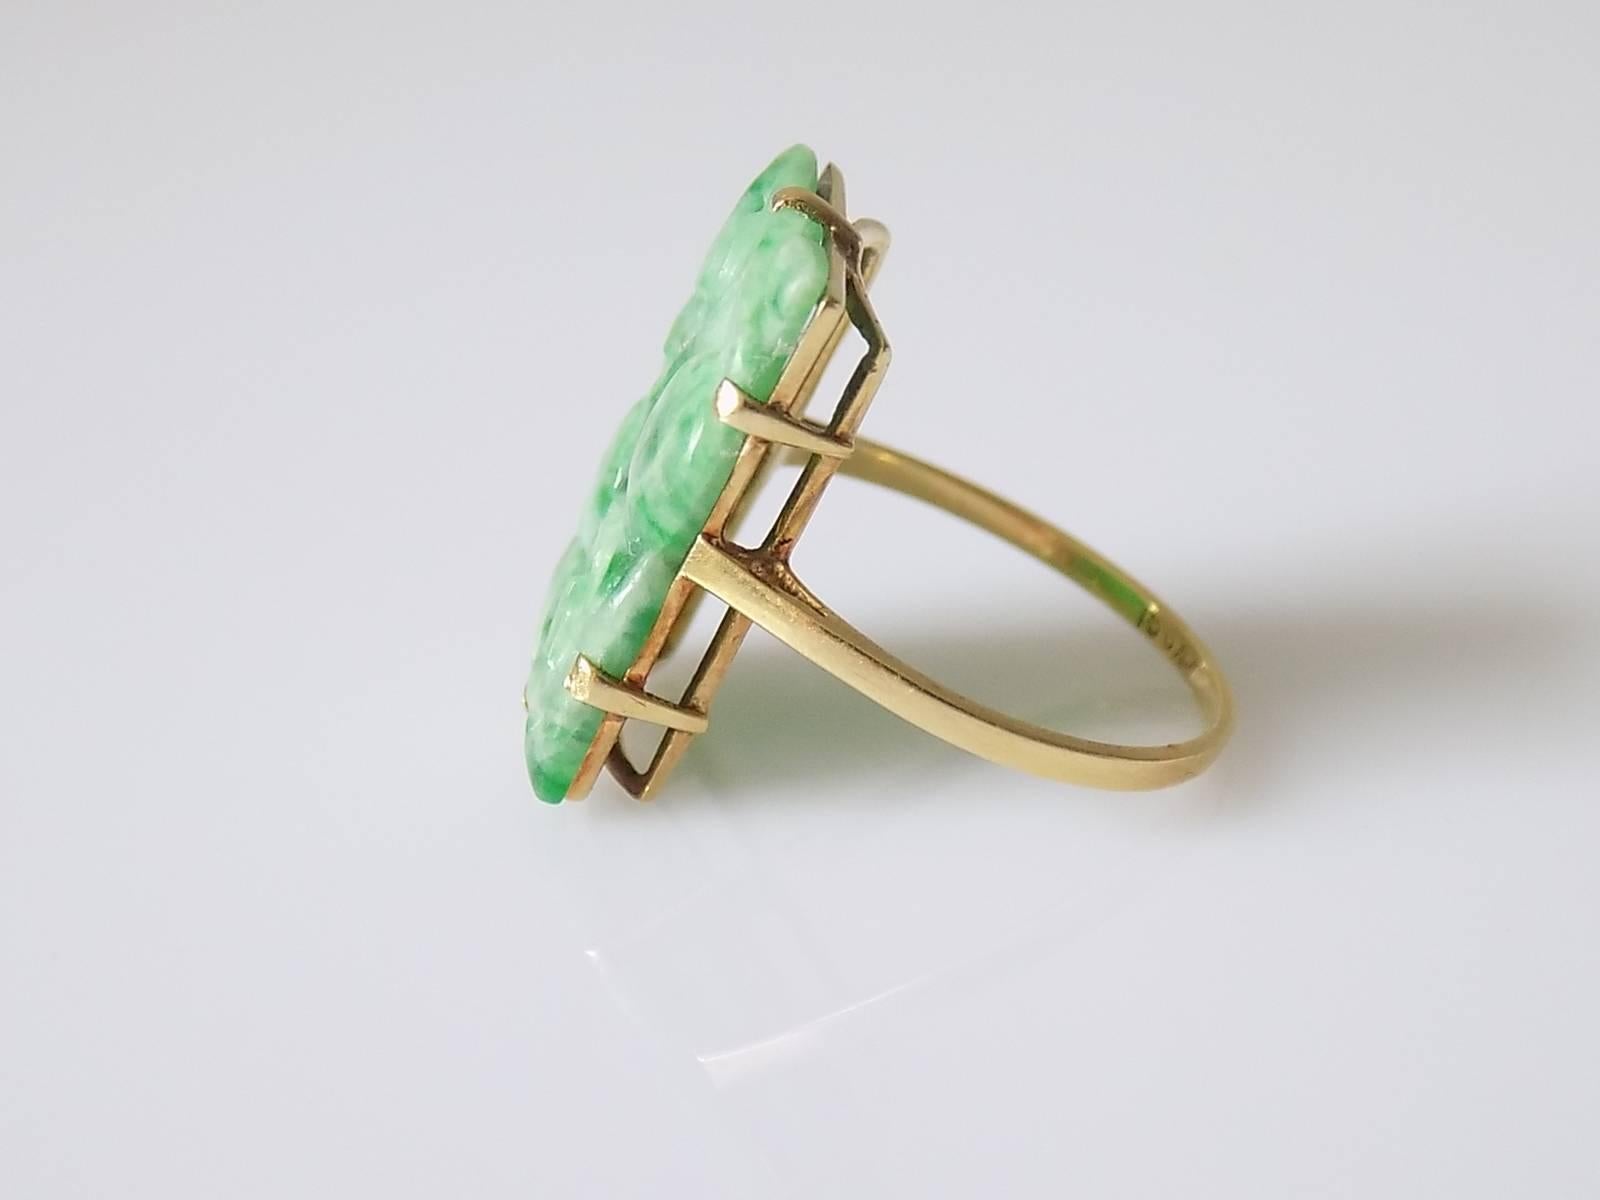 A Beautiful Art Deco c.1920s 15 Carat Gold and Carved jadeite jade ring. English origin.
Size N UK, 7 US,
Height of the face including claws 20mm, Width 14mm.
Weight 3.1gr.
Marked 15CT for 15 Carat Gold.